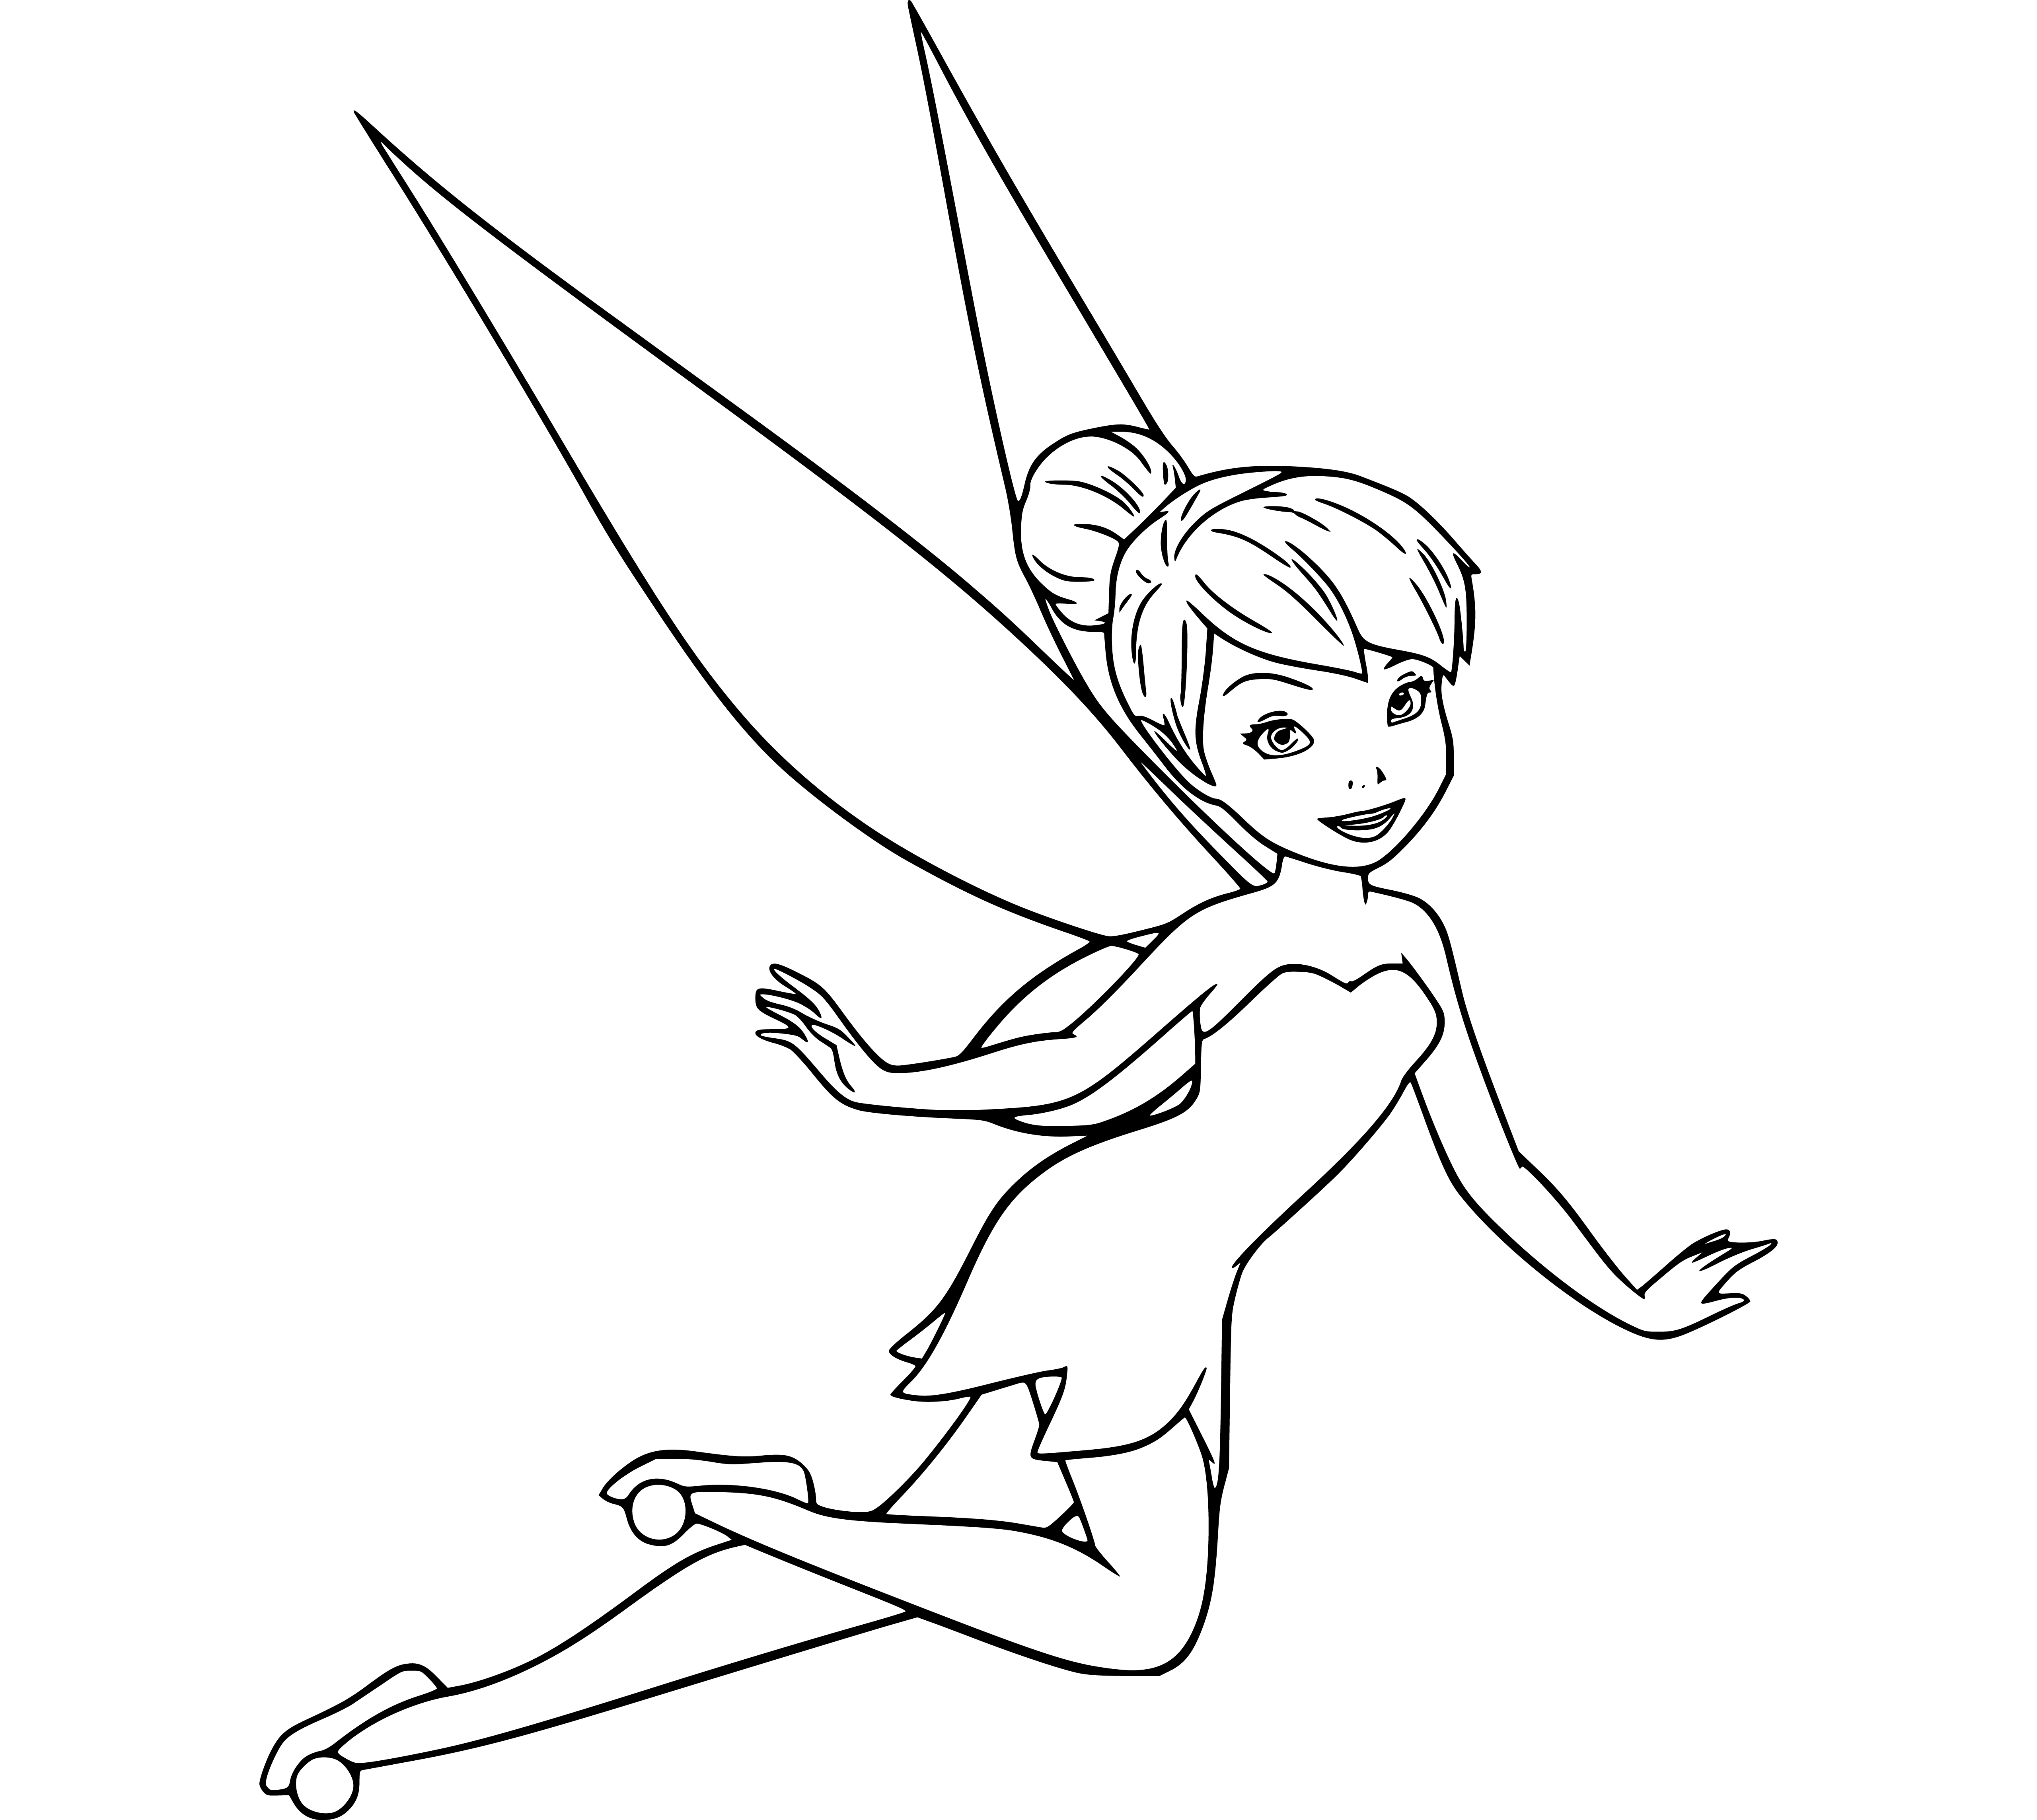 Tinker Bell flying Coloring Page for kids - SheetalColor.com